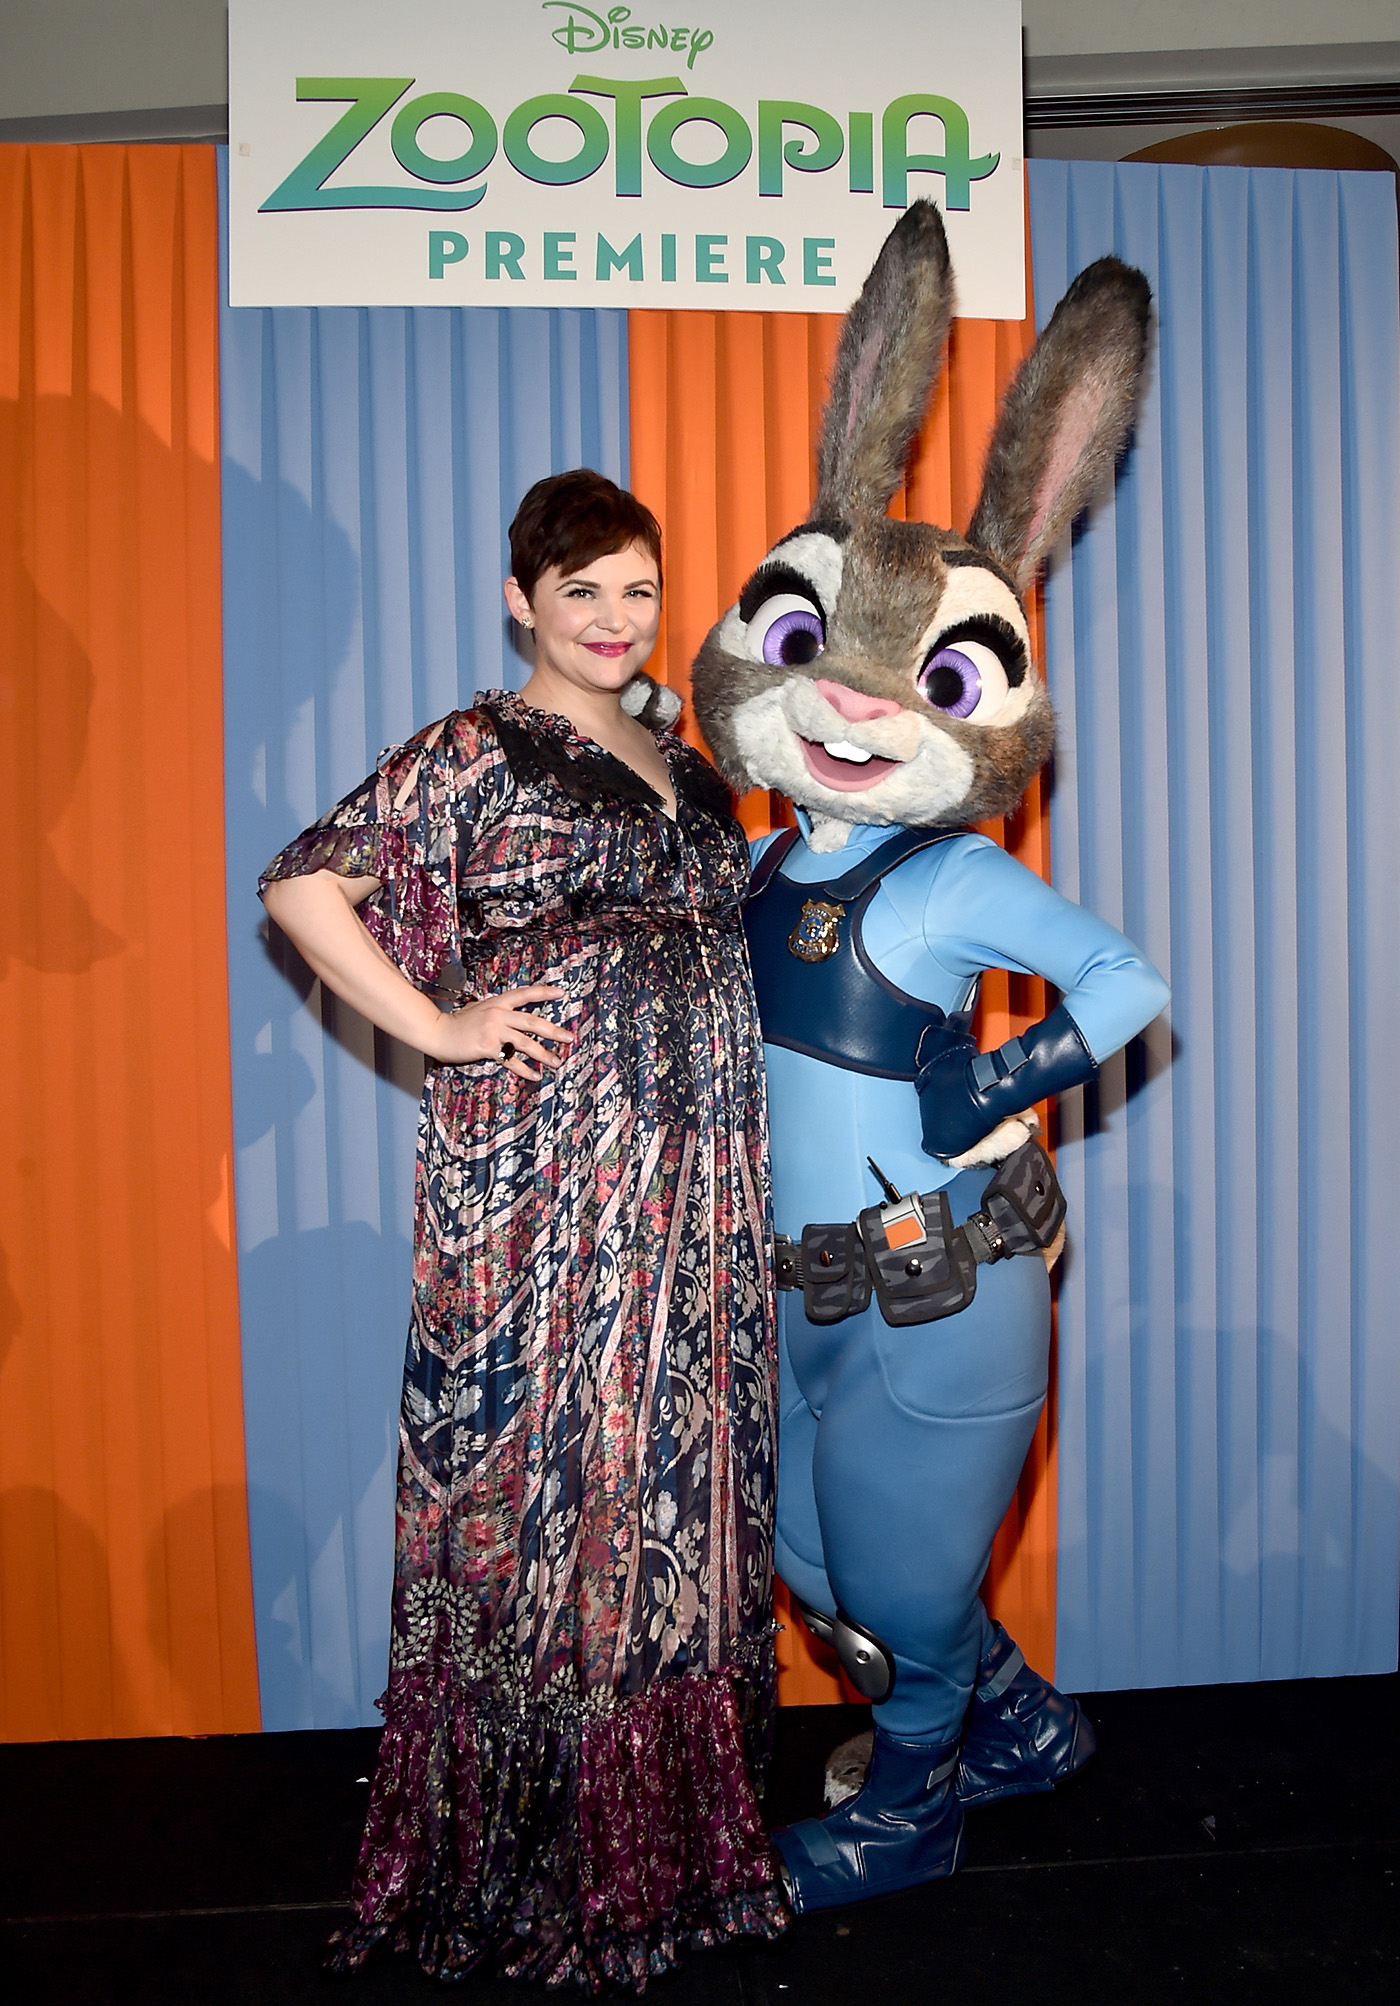 HOLLYWOOD, CA - FEBRUARY 17: Actress Ginnifer Goodwin attends the Los Angeles premiere of Walt Disney Animation Studios' "Zootopia" on February 17, 2016 in Hollywood, California. (Photo by Alberto E. Rodriguez/Getty Images for Disney) *** Local Caption *** Ginnifer Goodwin